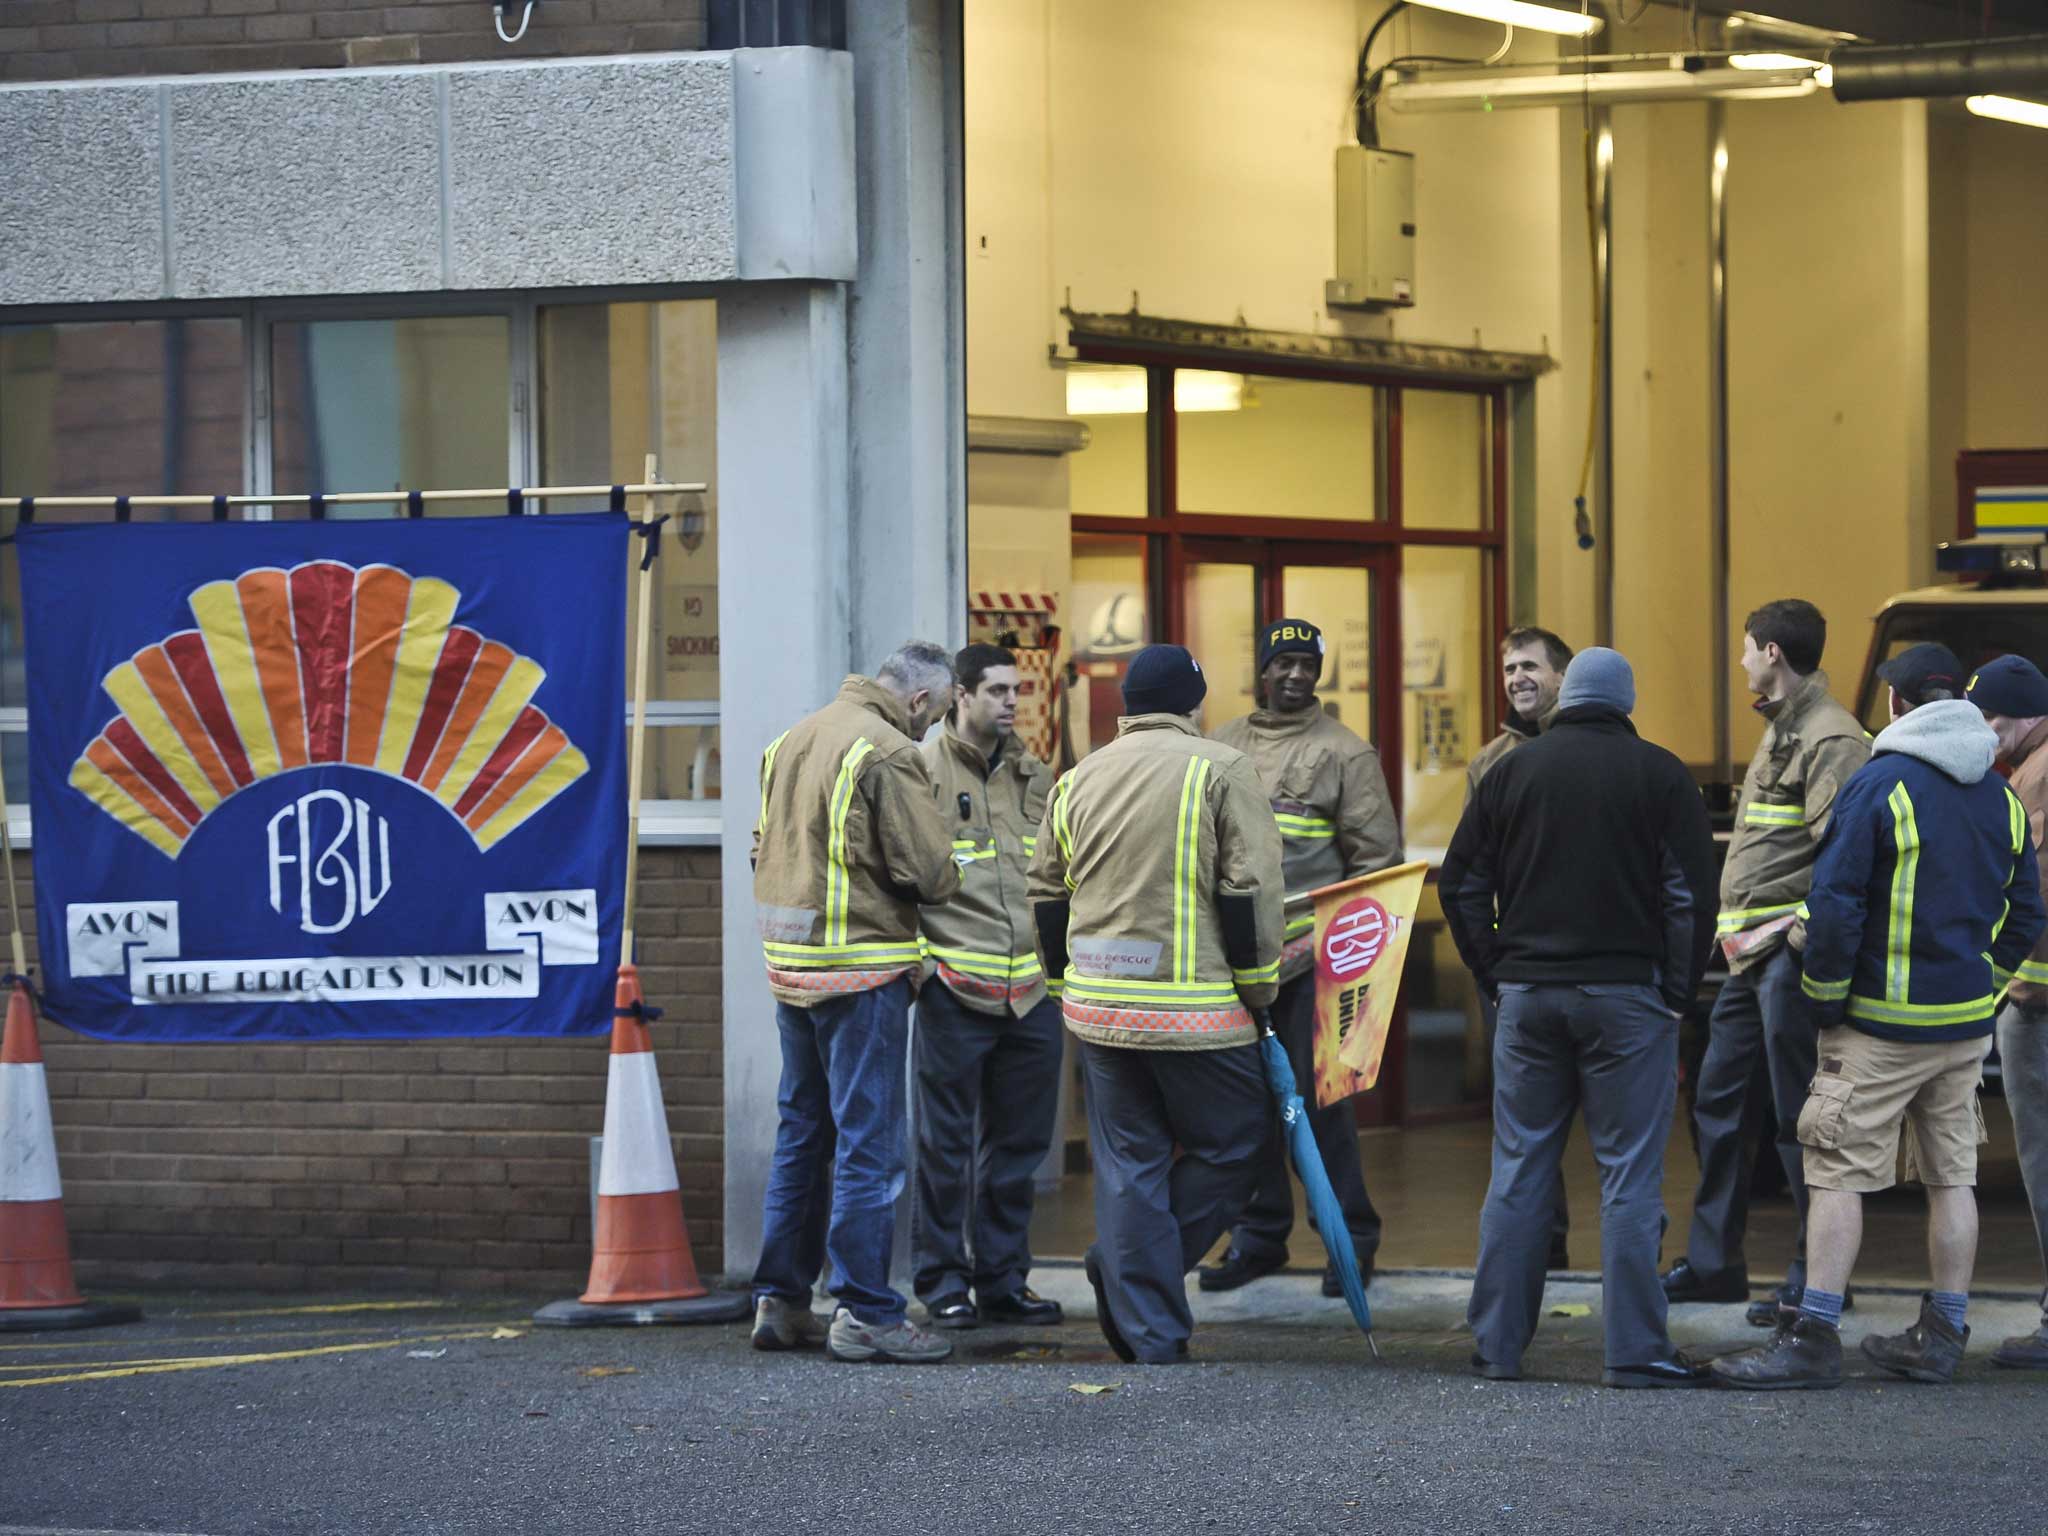 Firefighters in England and Wales are to stage a fresh strike